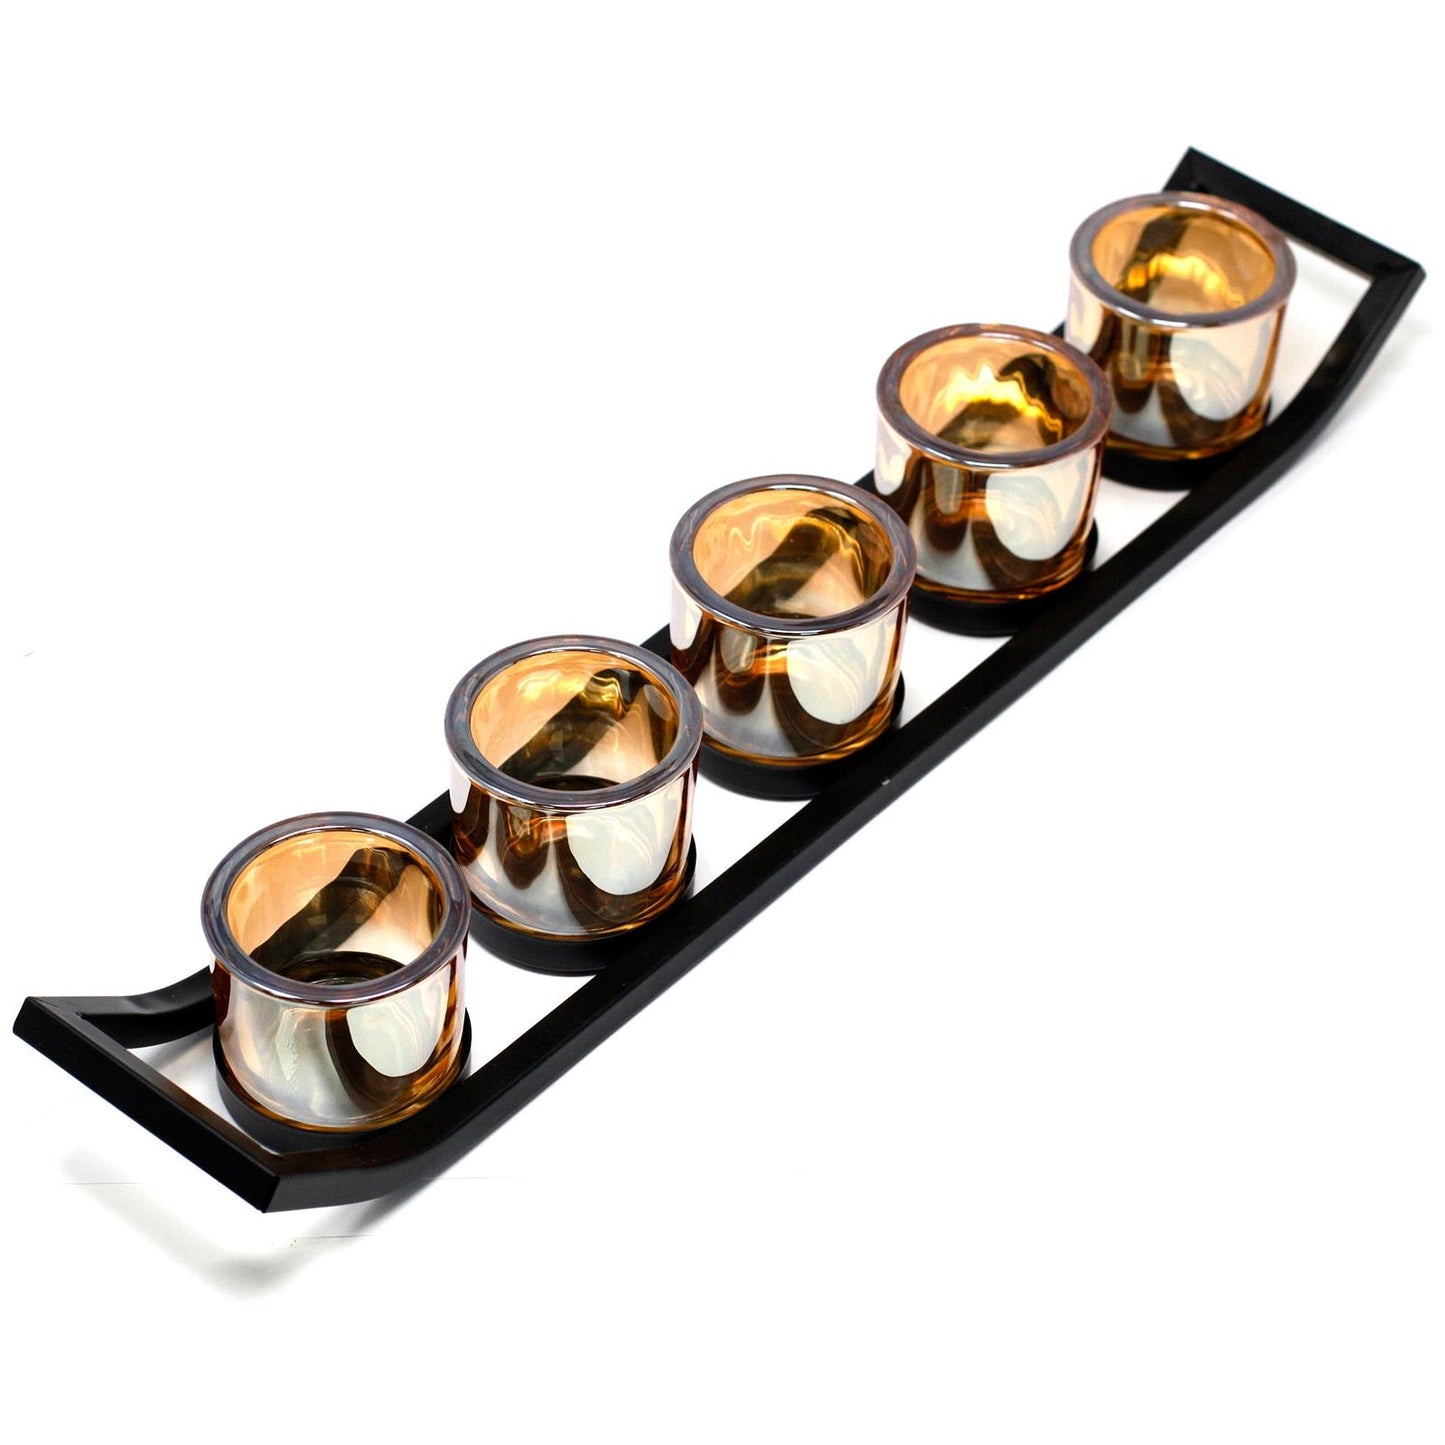 Centrepiece Iron Votive Candle Holder - 5 Cup Ledge - Ashton and Finch